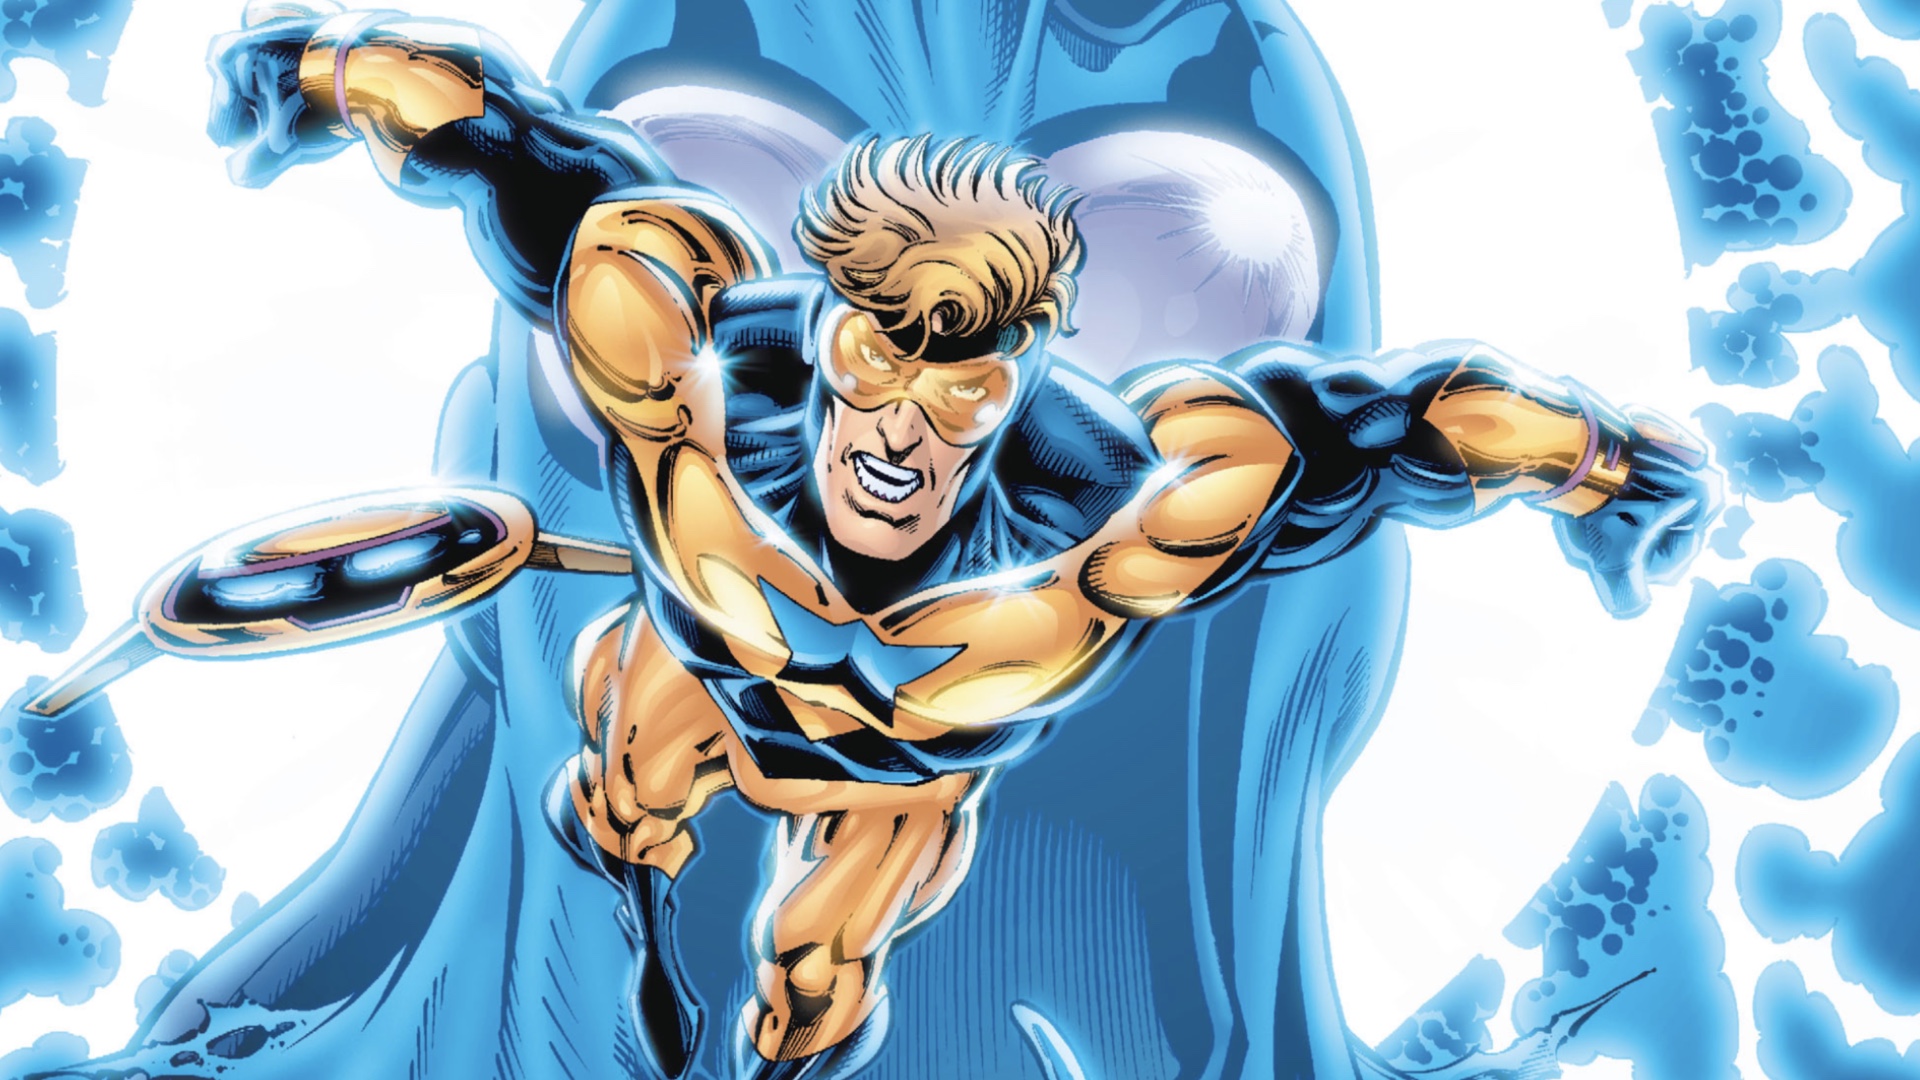 Booster Gold - The comic history of DC's time-traveling himbo | GamesRadar+